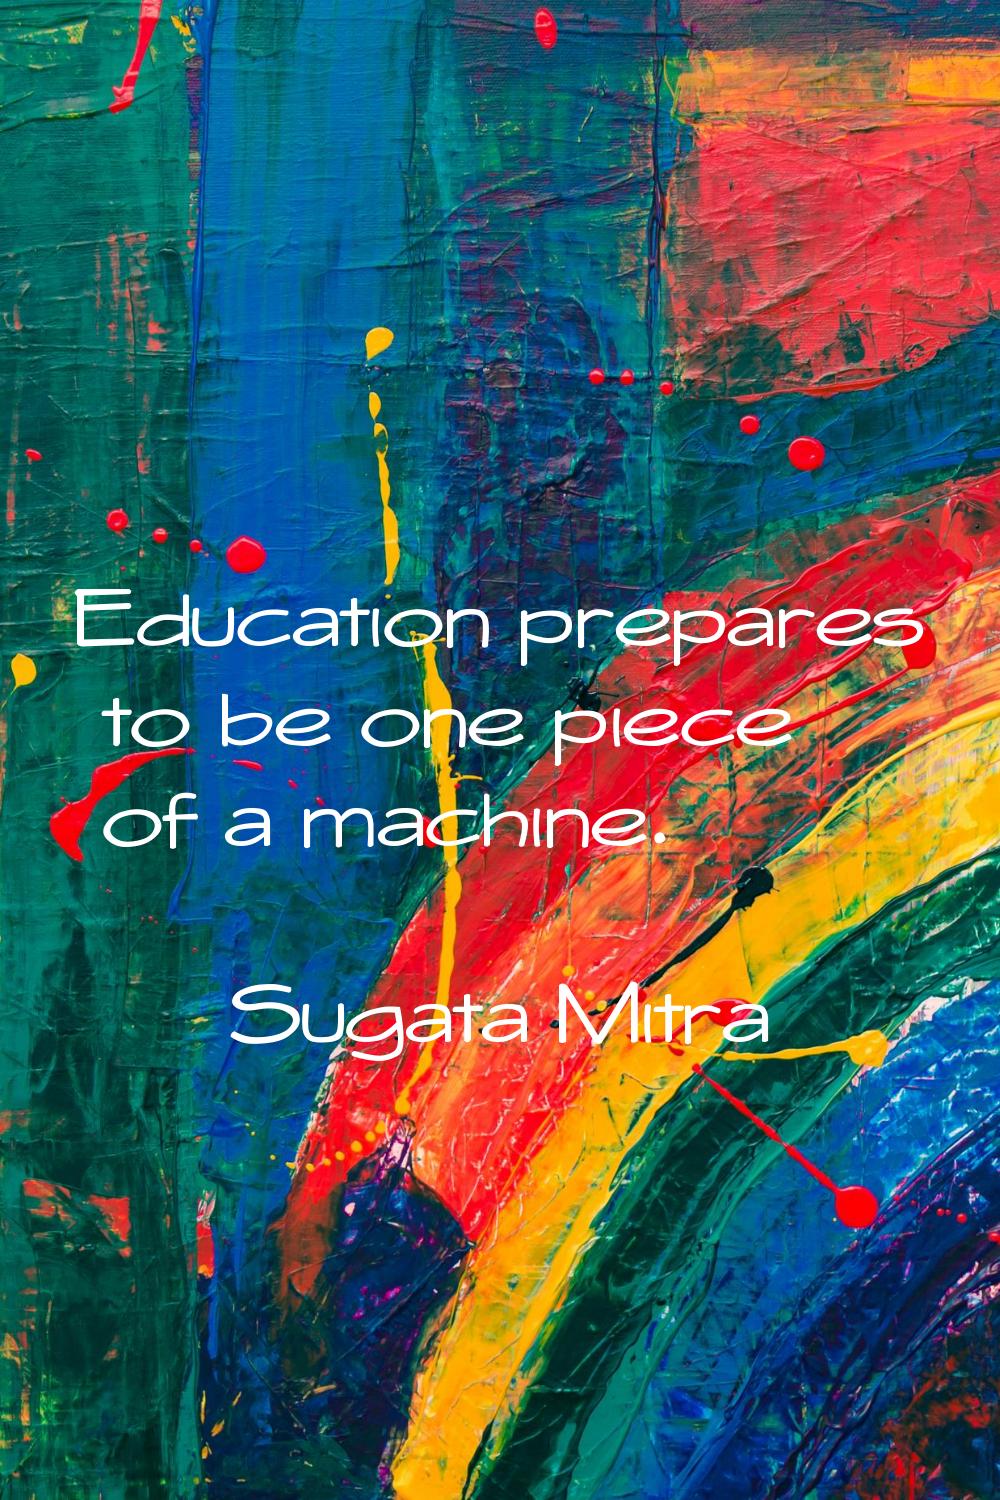 Education prepares to be one piece of a machine.